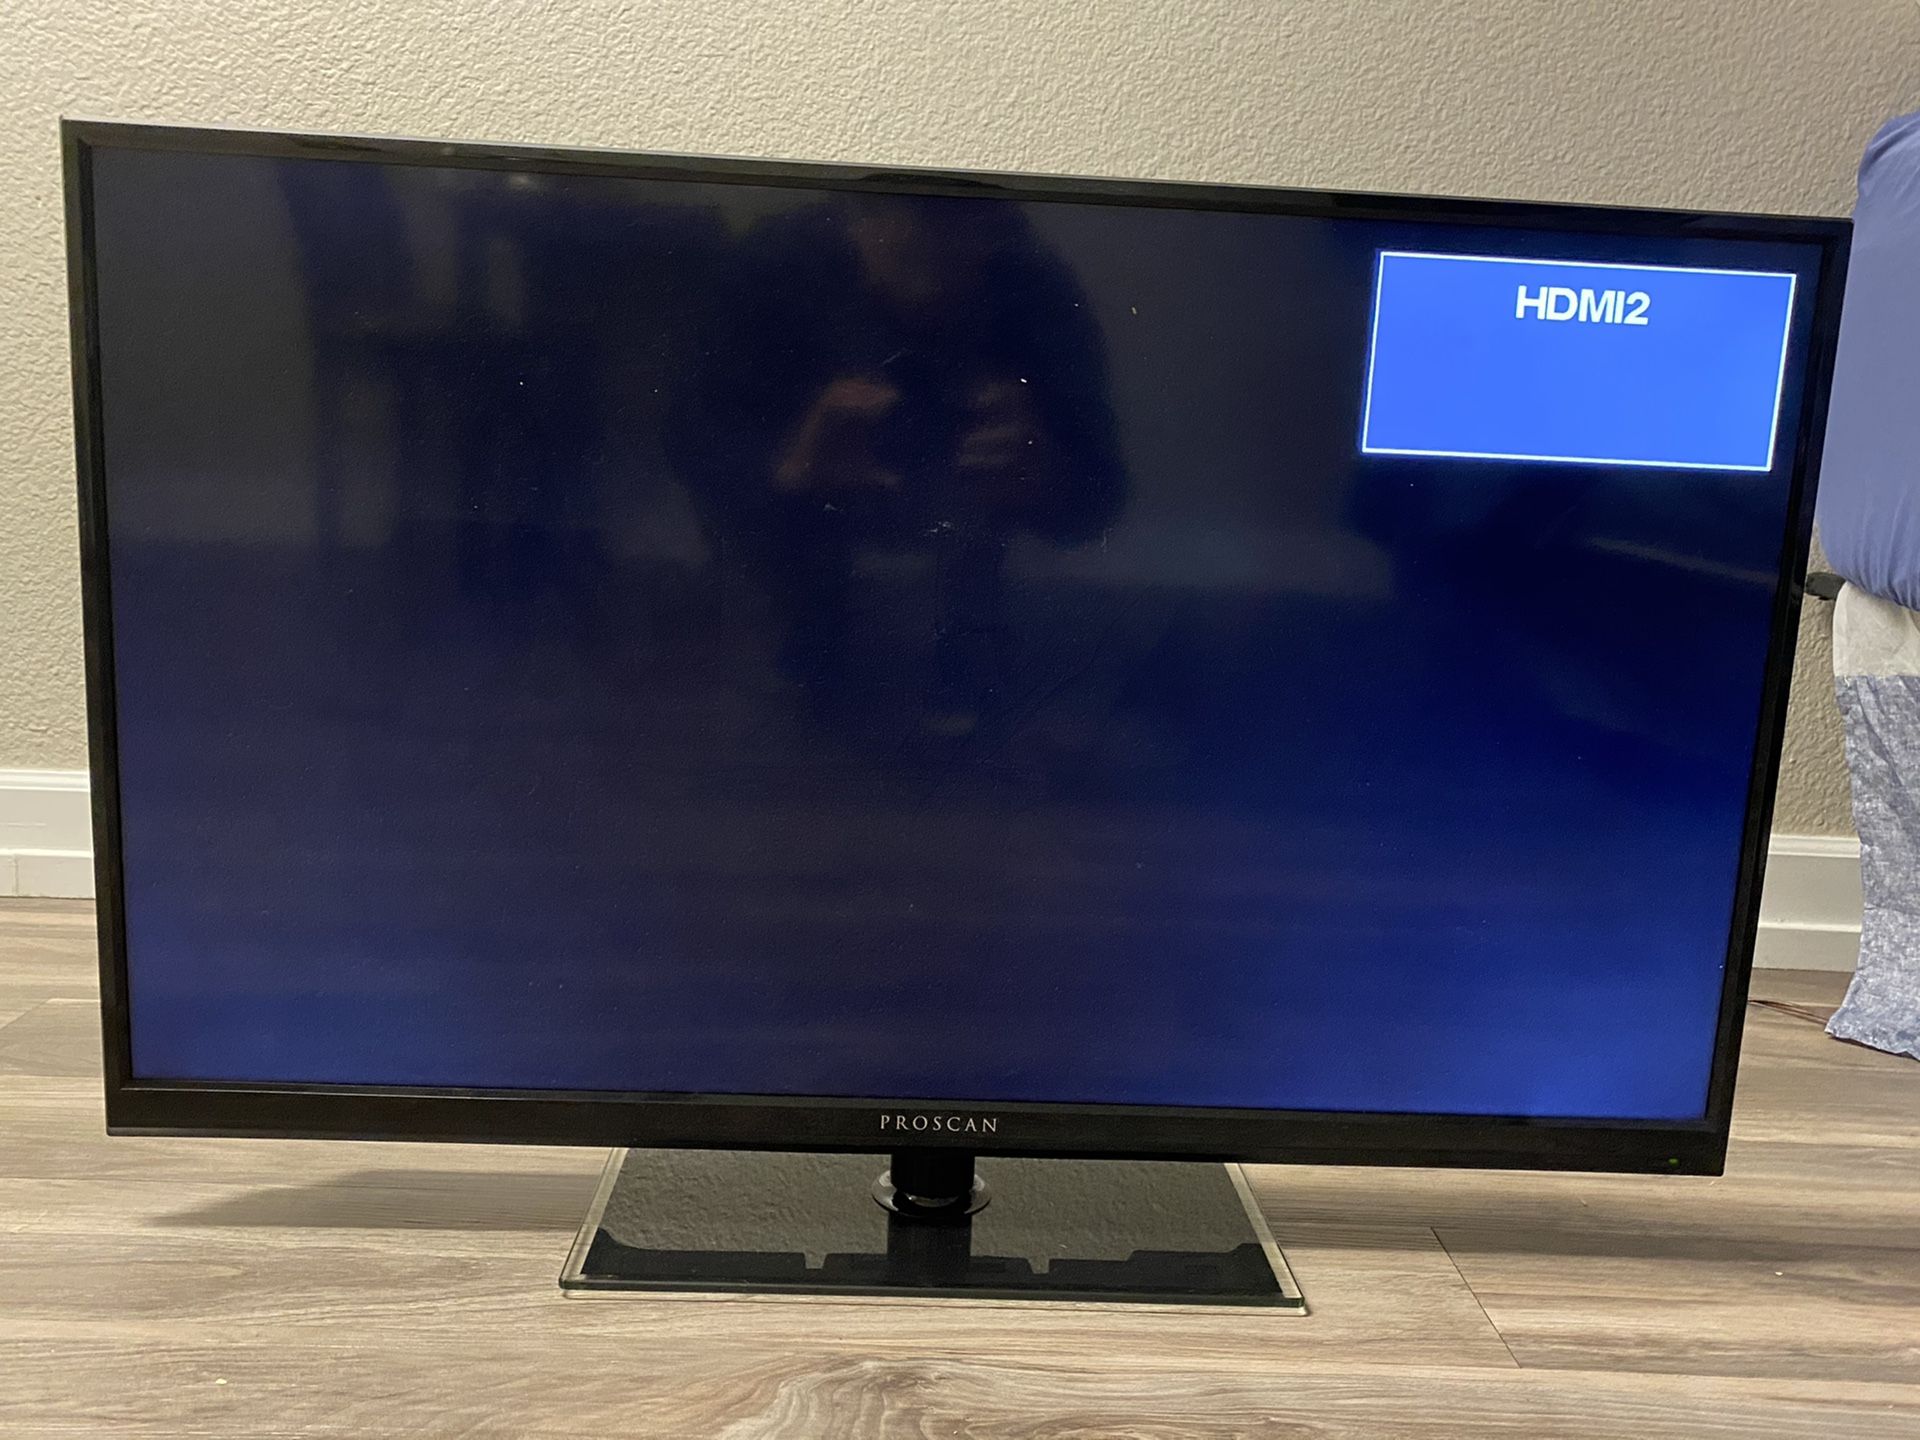 40 inch 1080p Proscan TV with stand